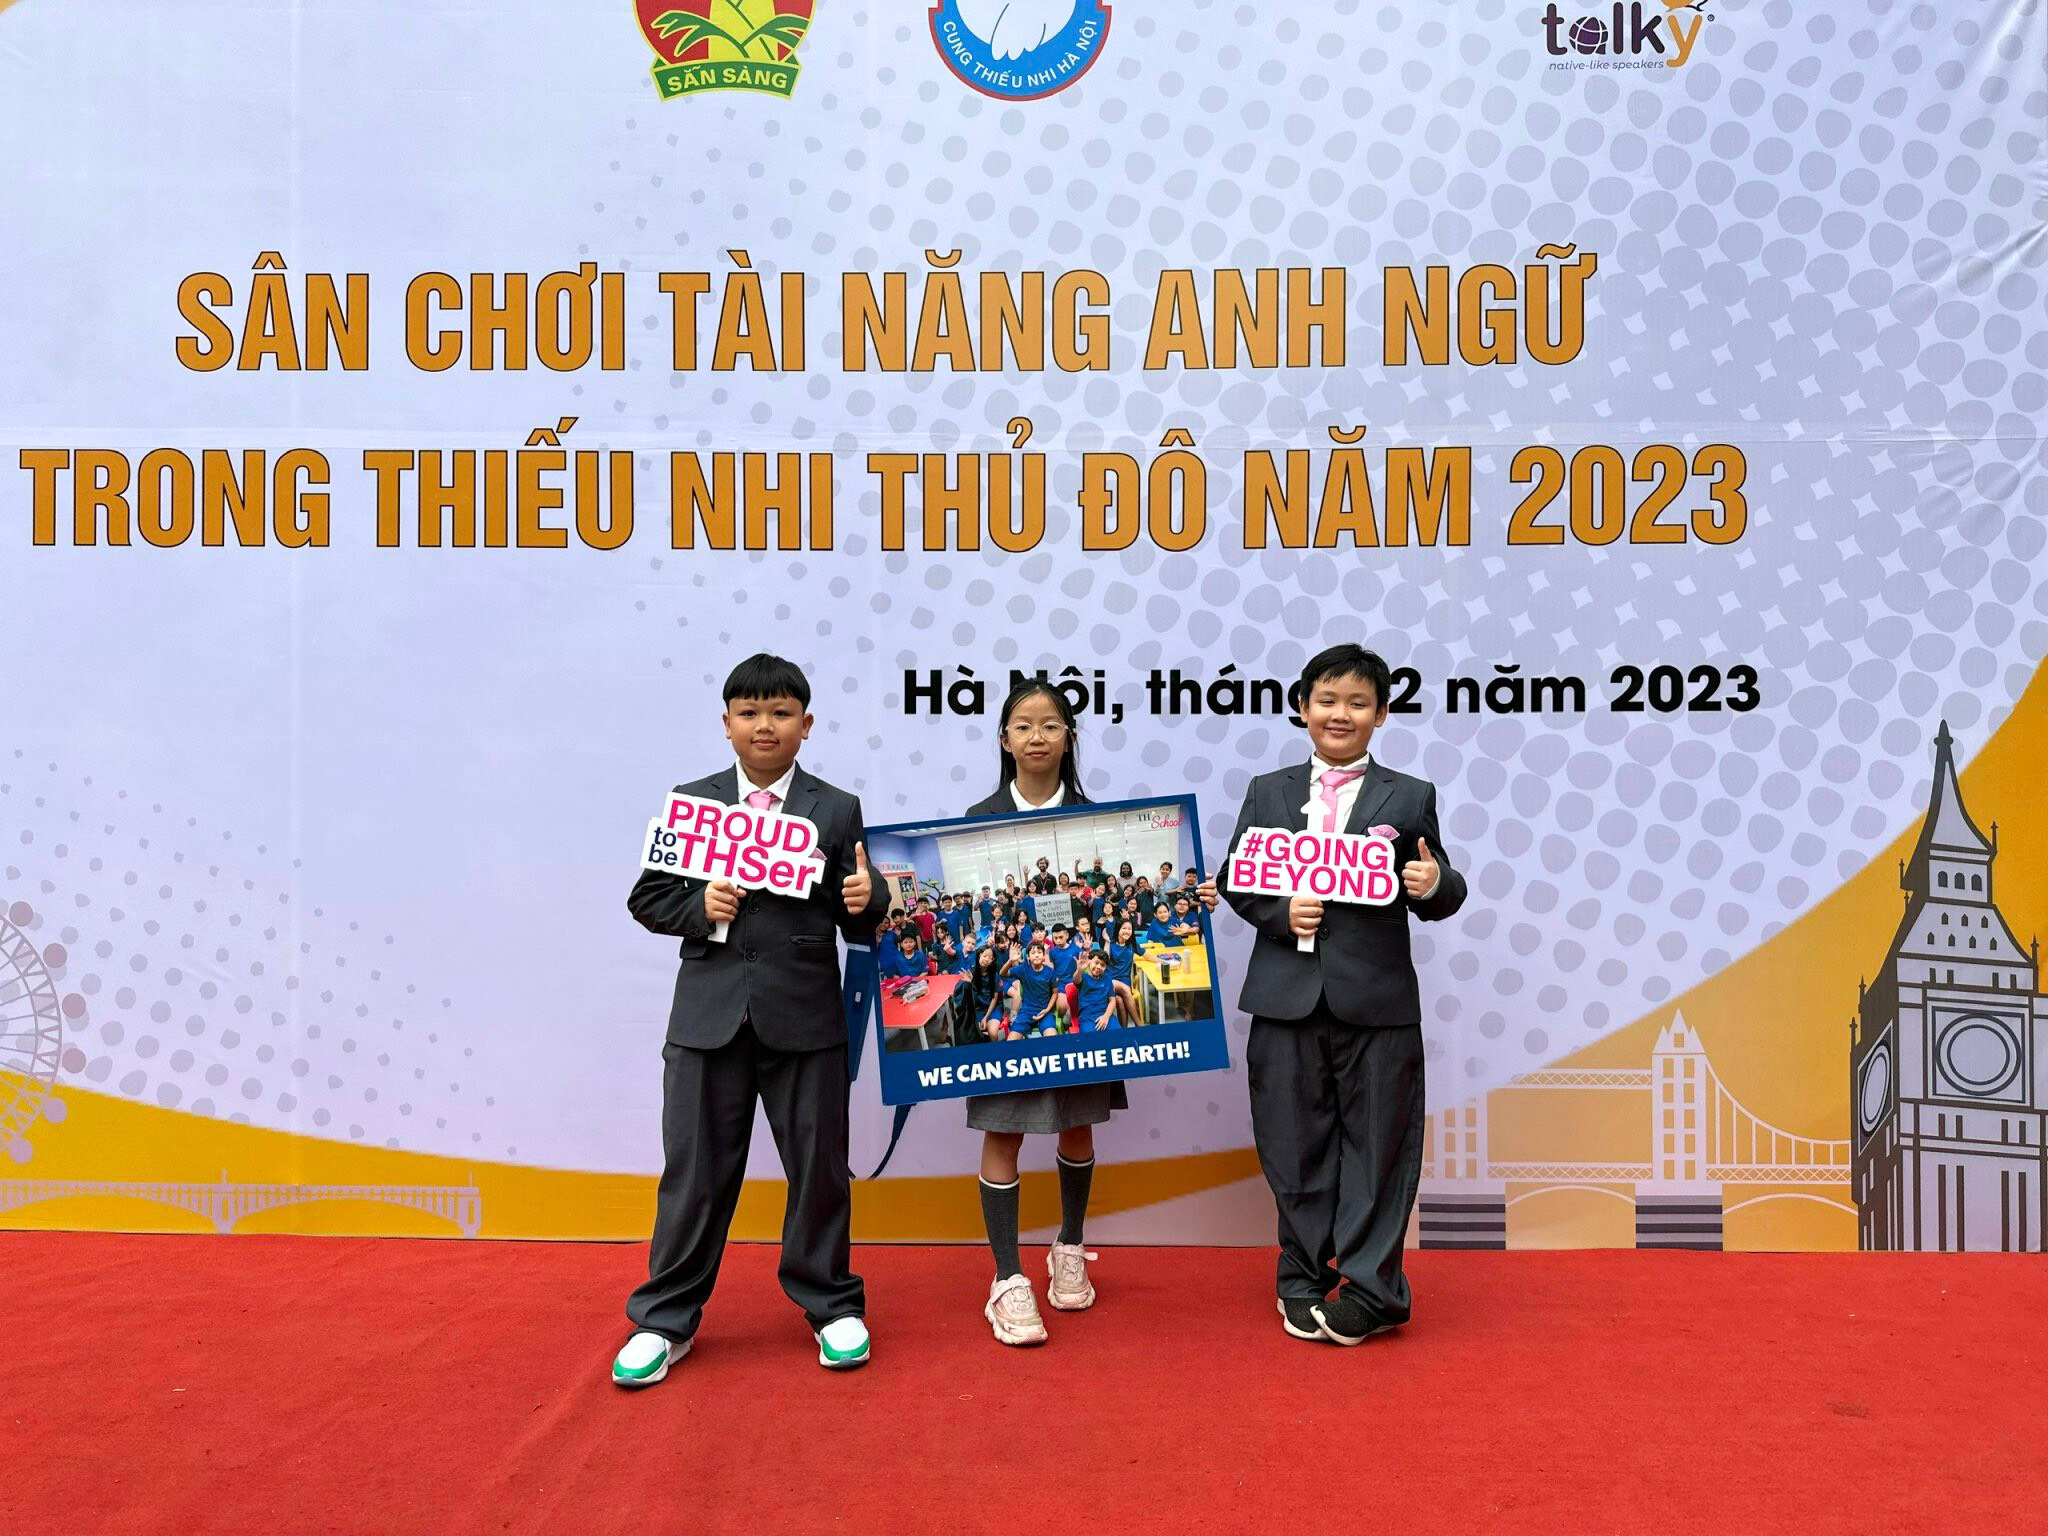 Our young debaters shined at the Hanoi Debate Competition